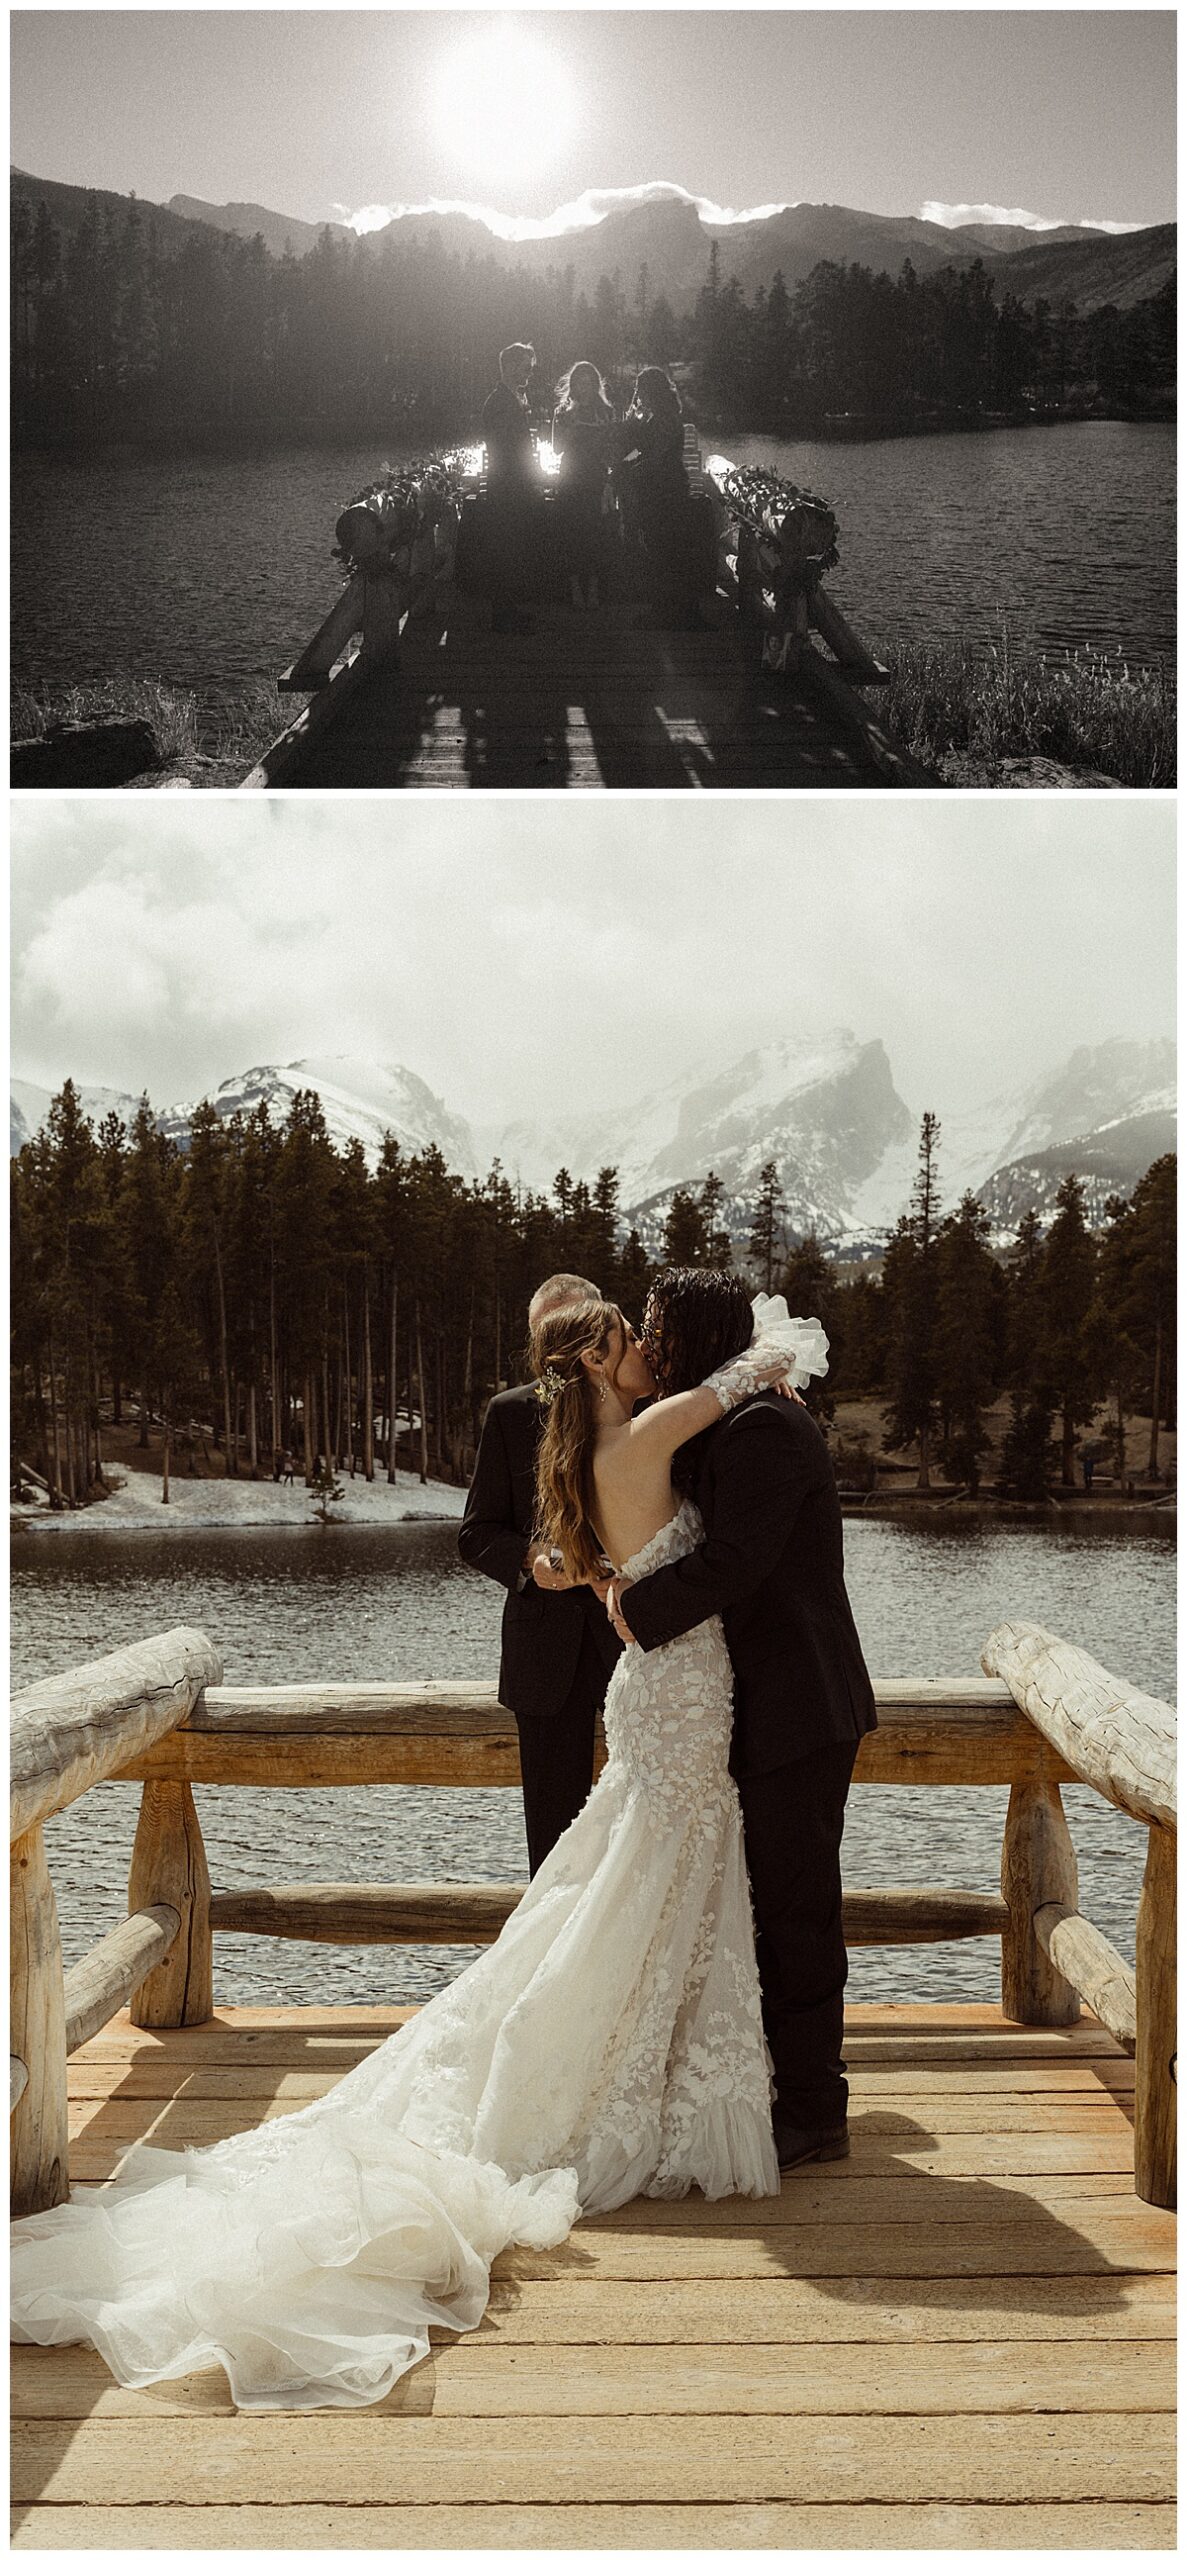 Two couples eloping at Rocky Mountain National Park on a bridge overlooking a lake.